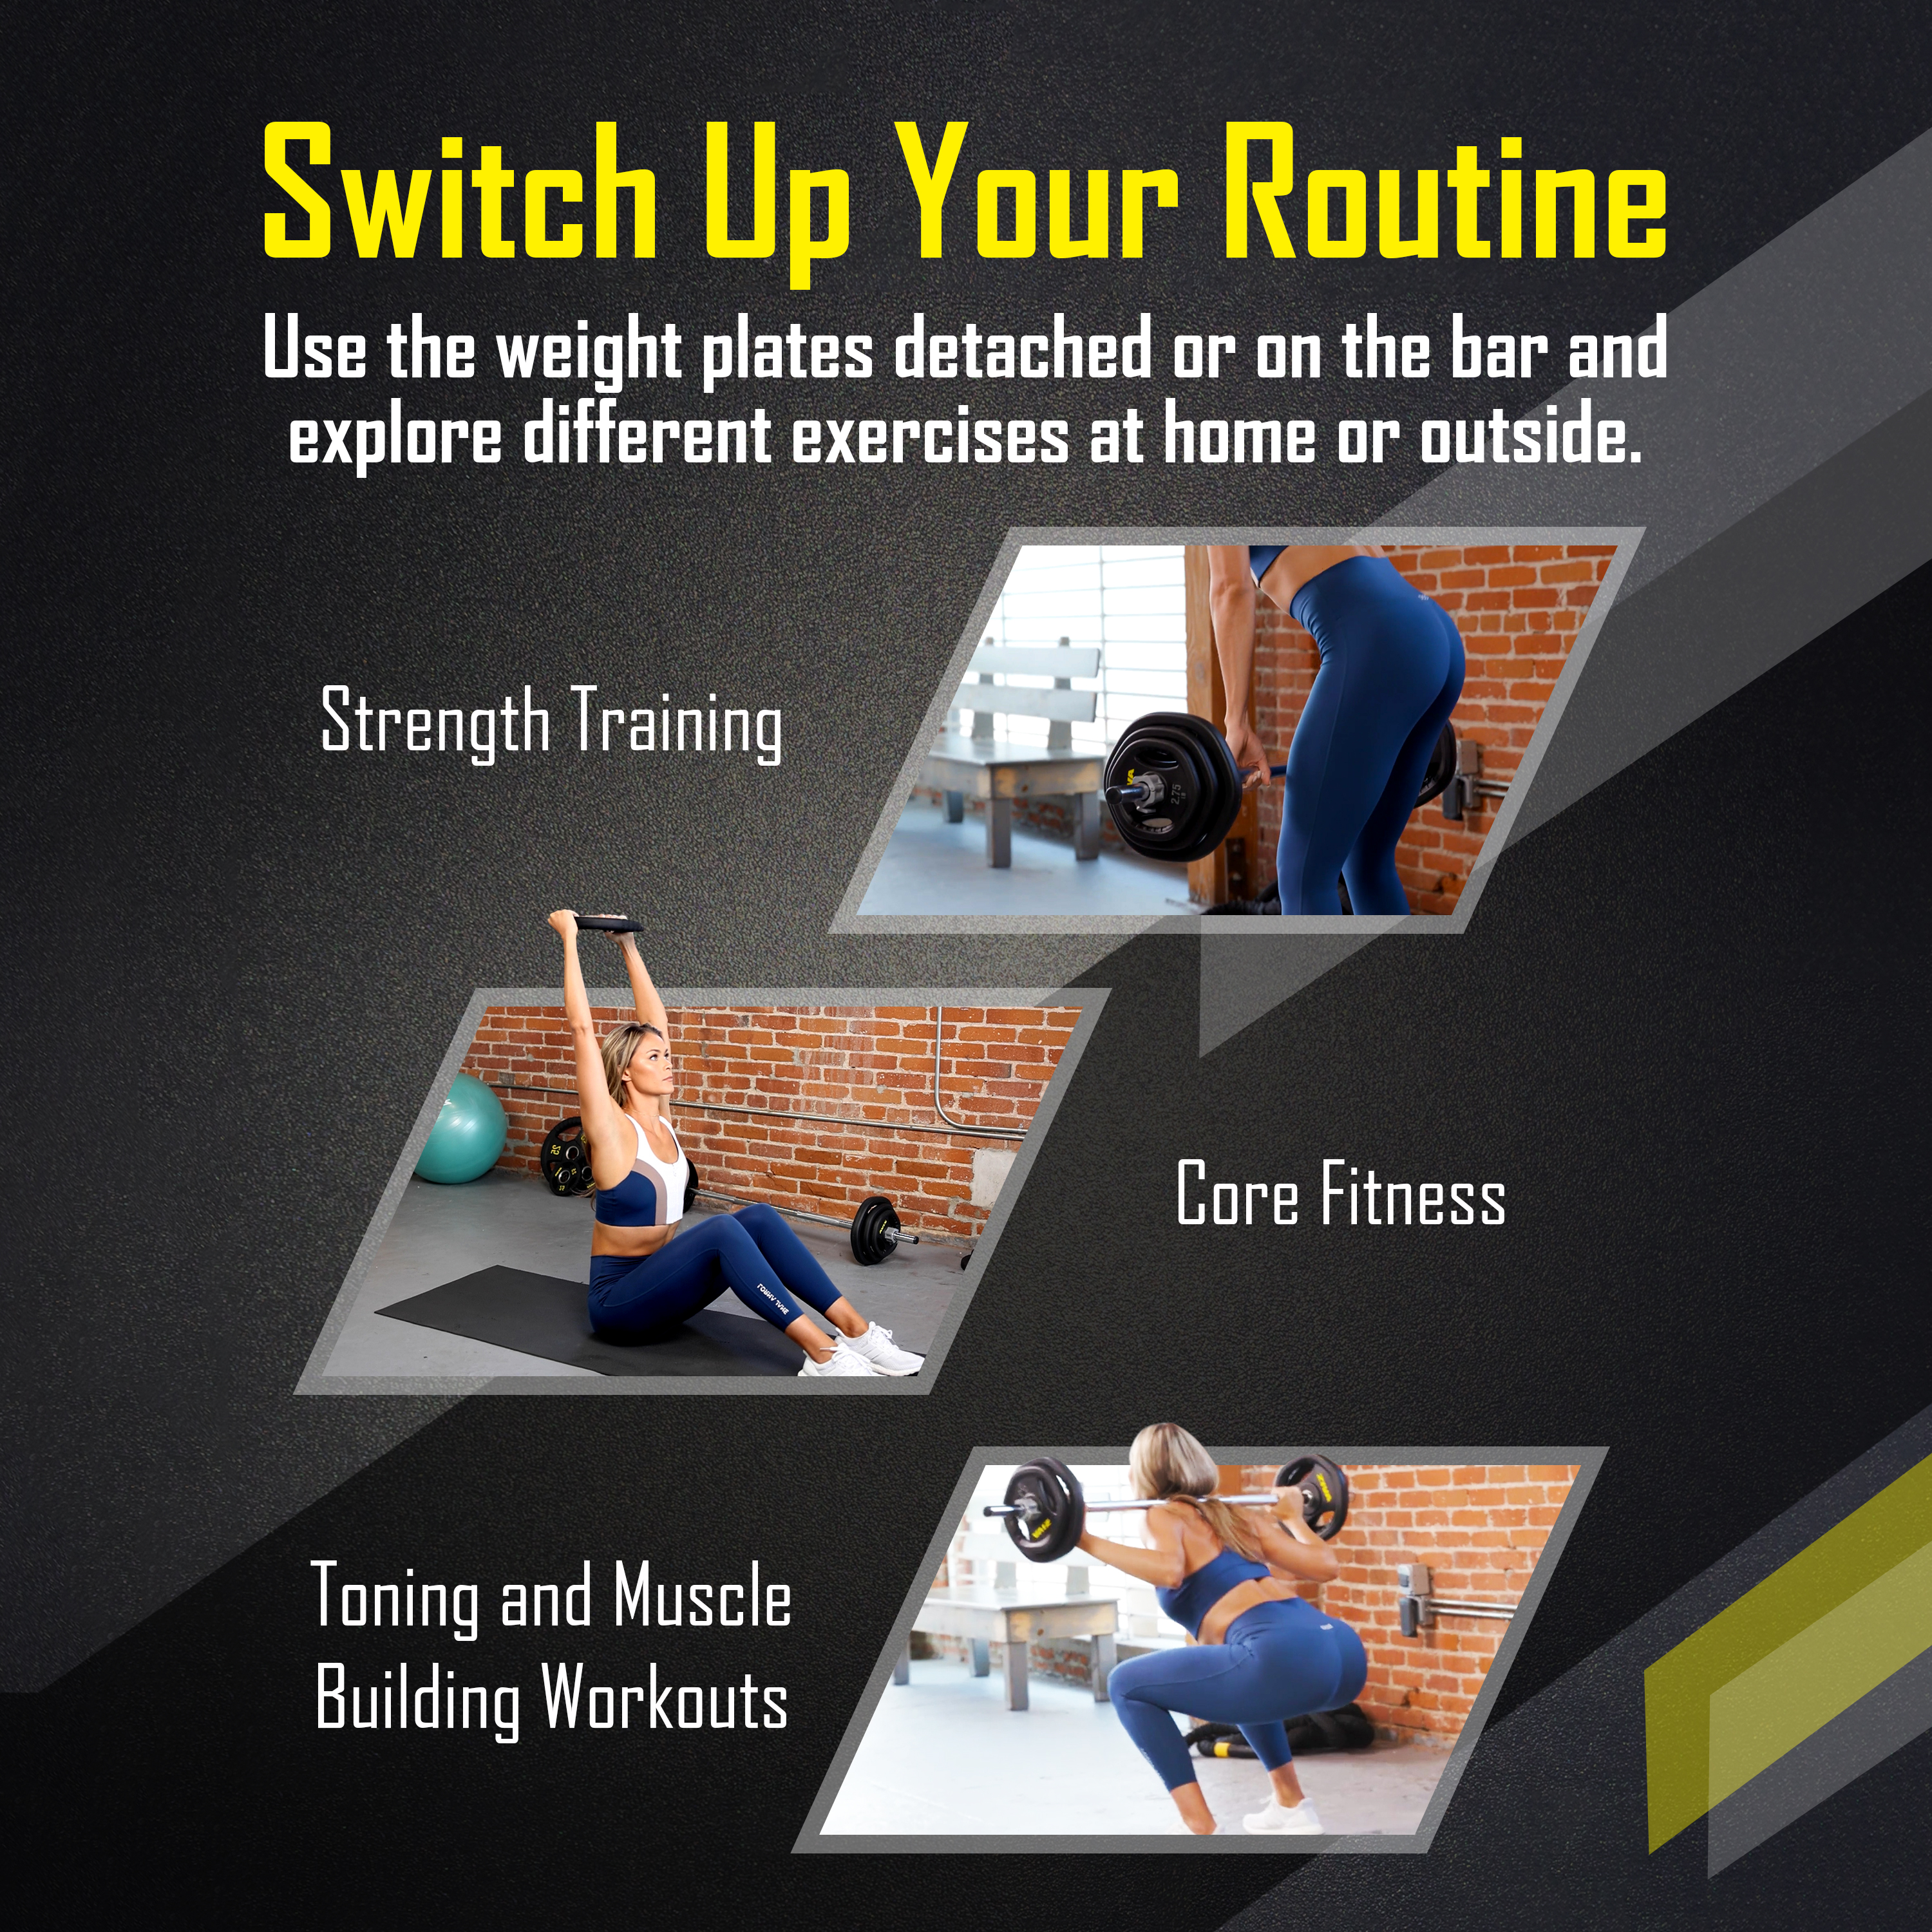 Switch up your routine. Use the weight plates detached or on the bar and explore different exercises at home or outside. Strength Training, core fitness, and toning and muscle building workouts.